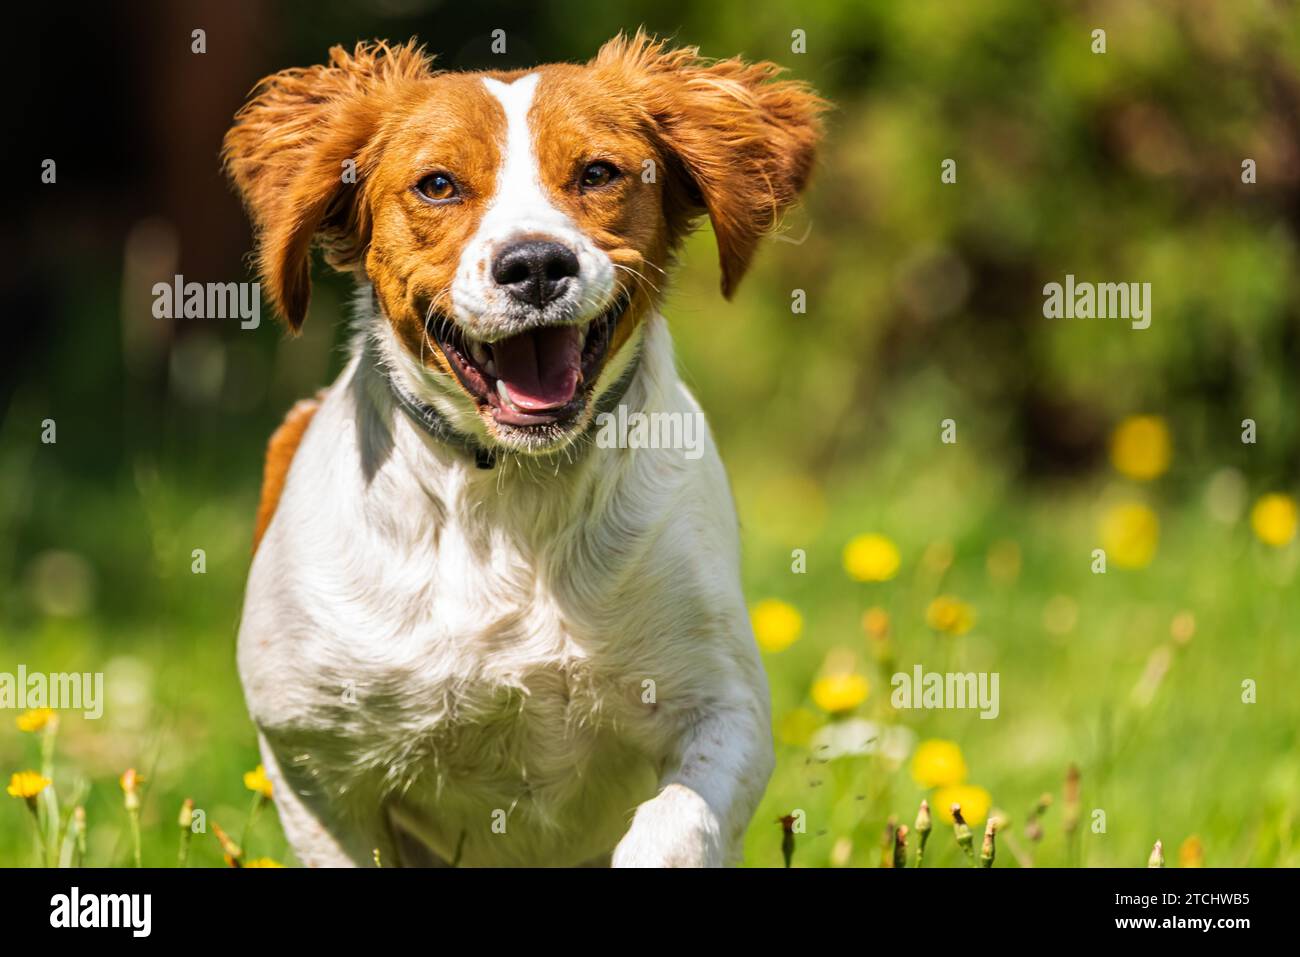 Brittany dog spaniel female puppy running through grass towards camera. Animal background. Copy space on right Stock Photo